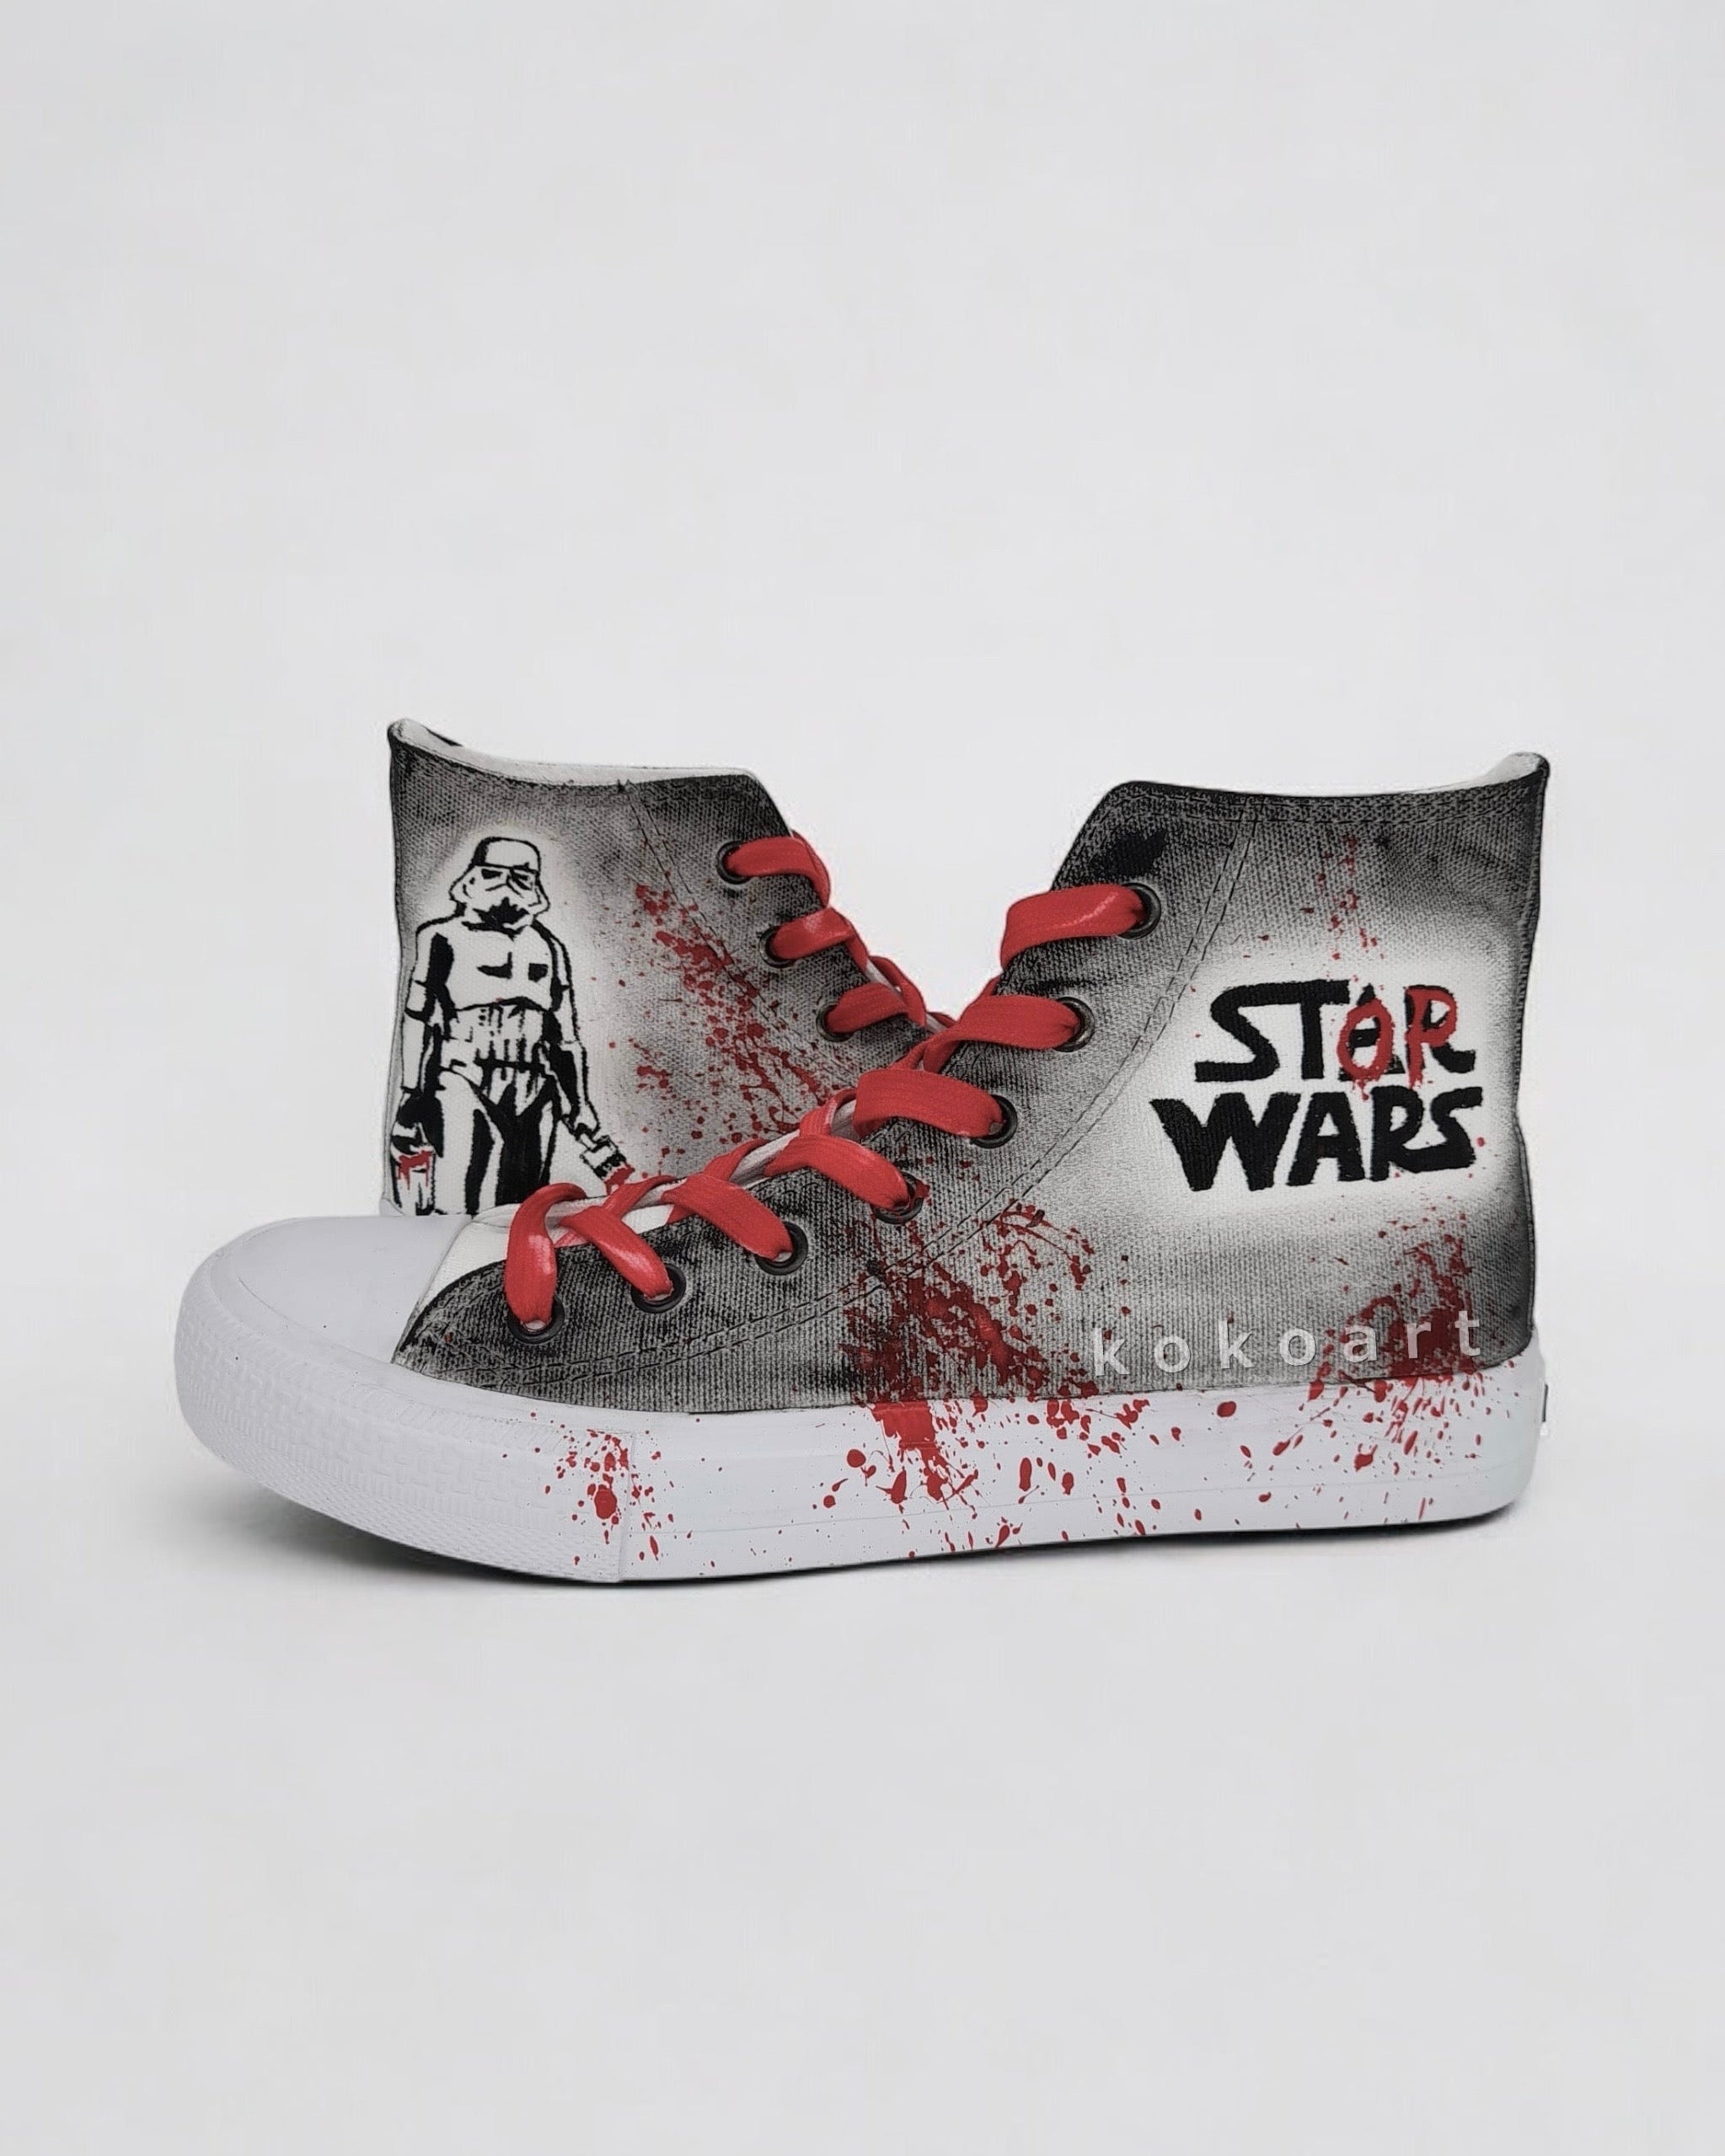 Stop Wars Hand Painted Shoes